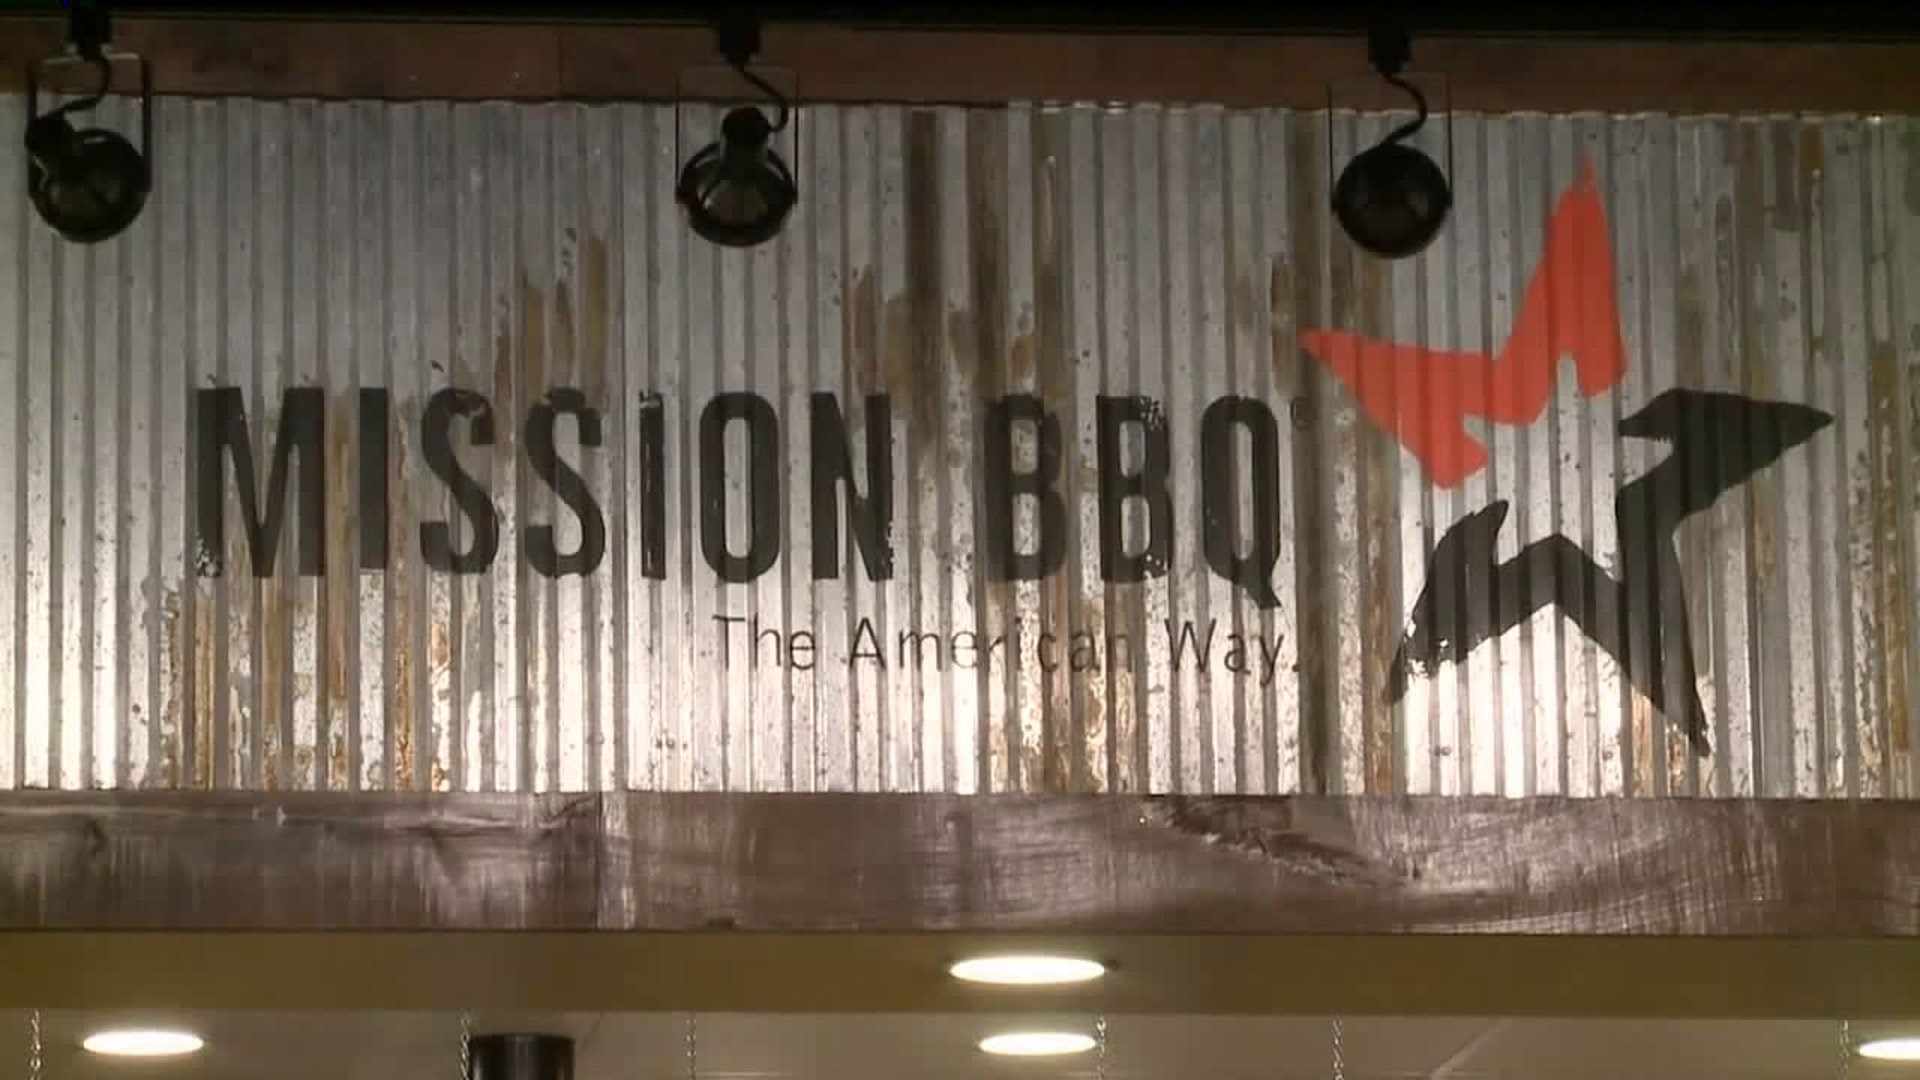 Mission BBQ Set to Open in Tornado Damaged Plaza, Already Serving the Community